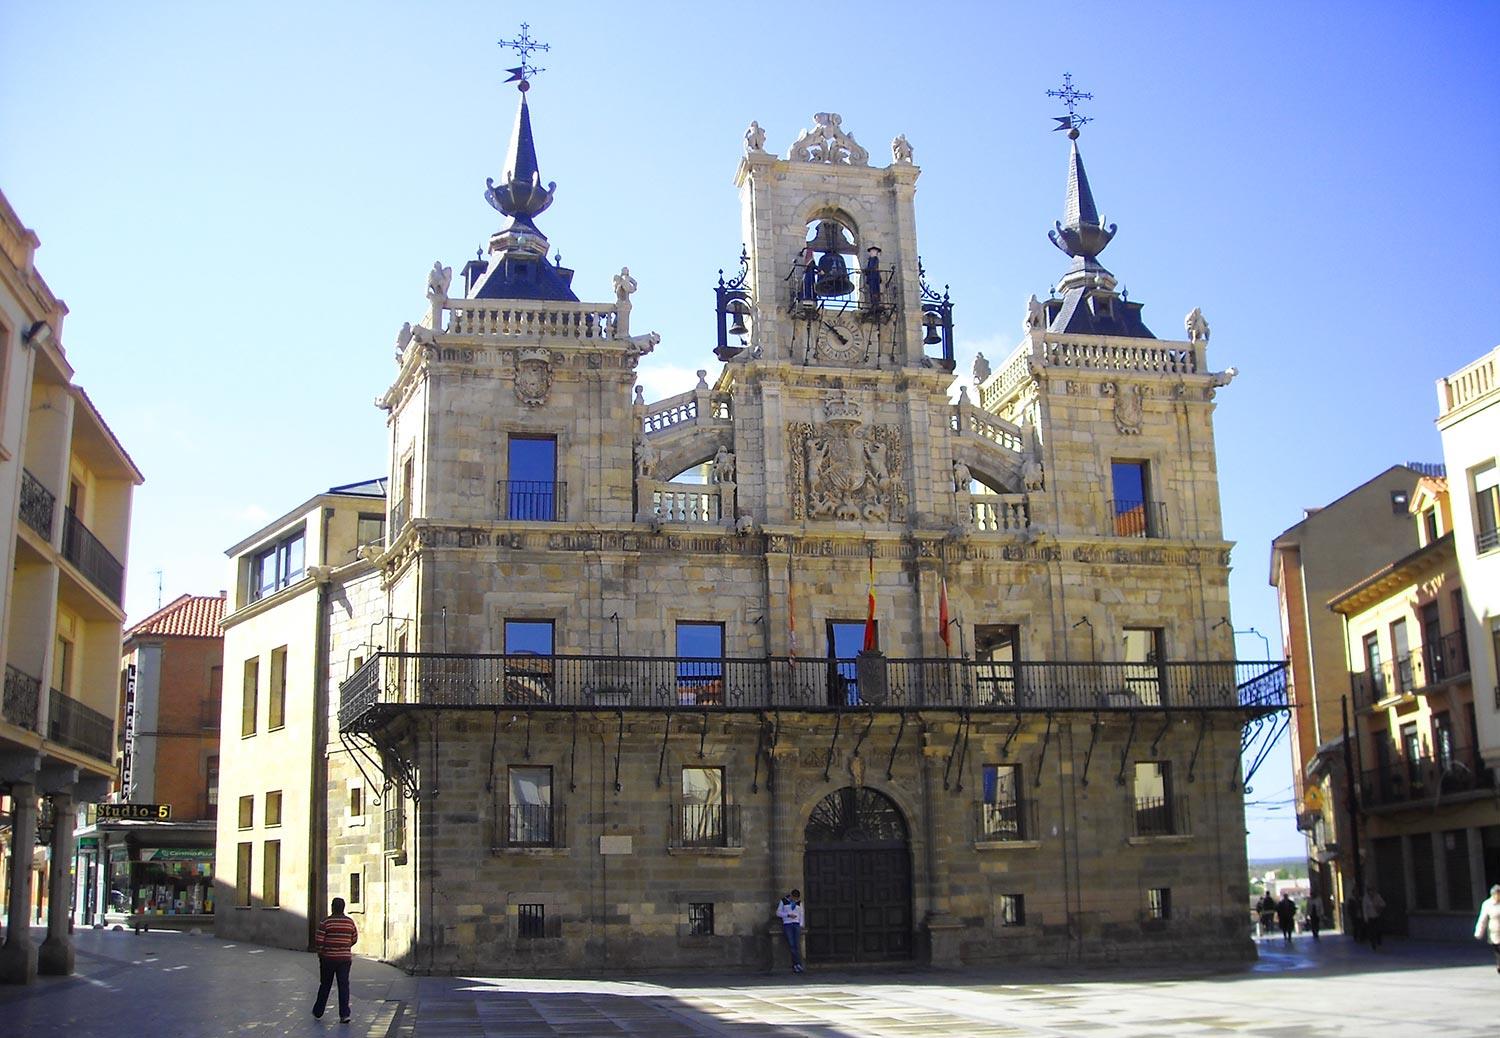 Free Tour discovering the city of Astorga